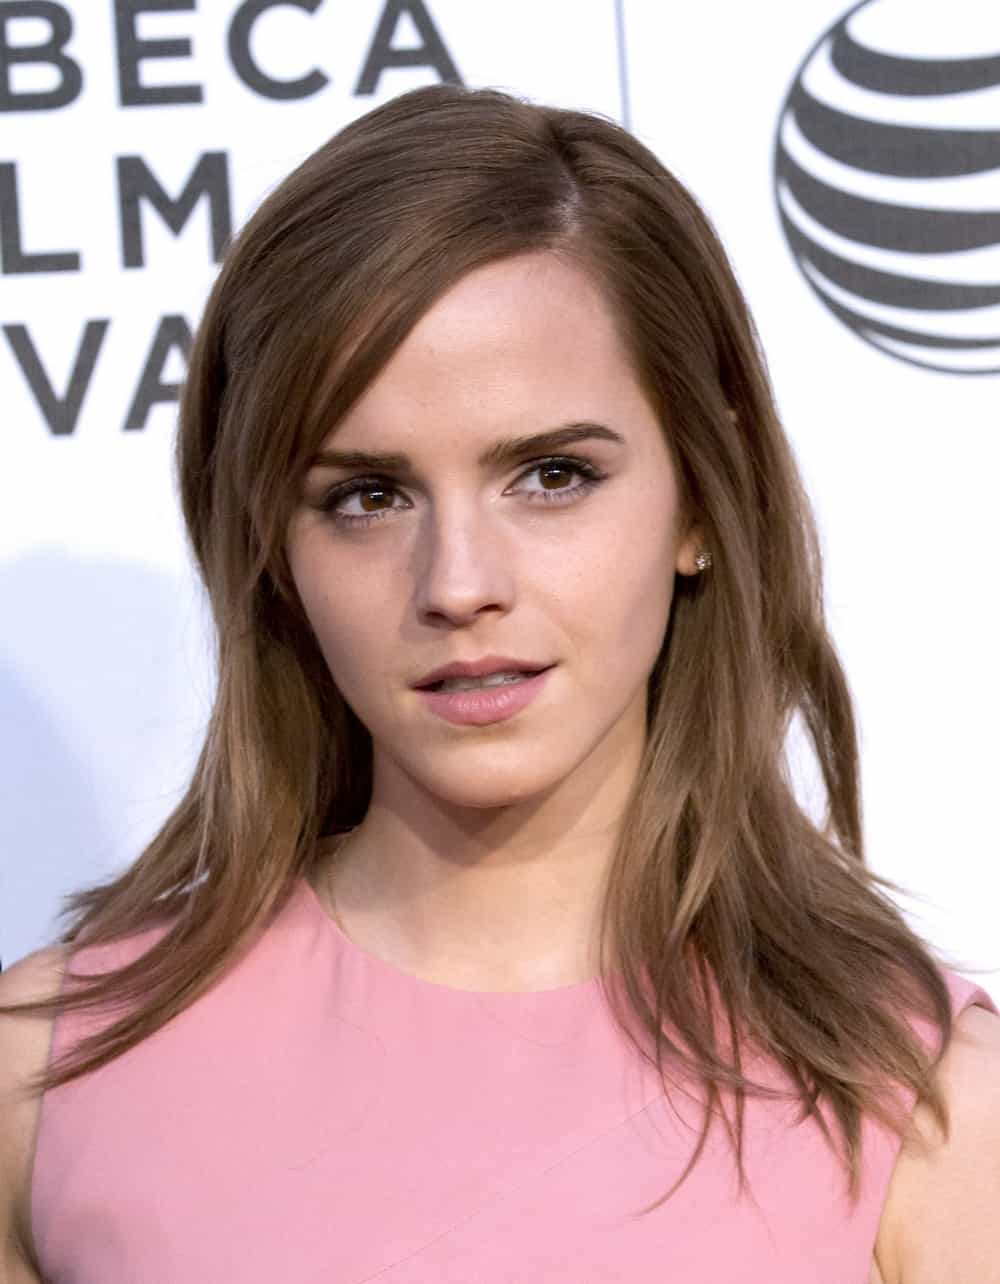 Emma Watson Was Spectacular in a Mini Skirt at the Premiere of "Boulevard"